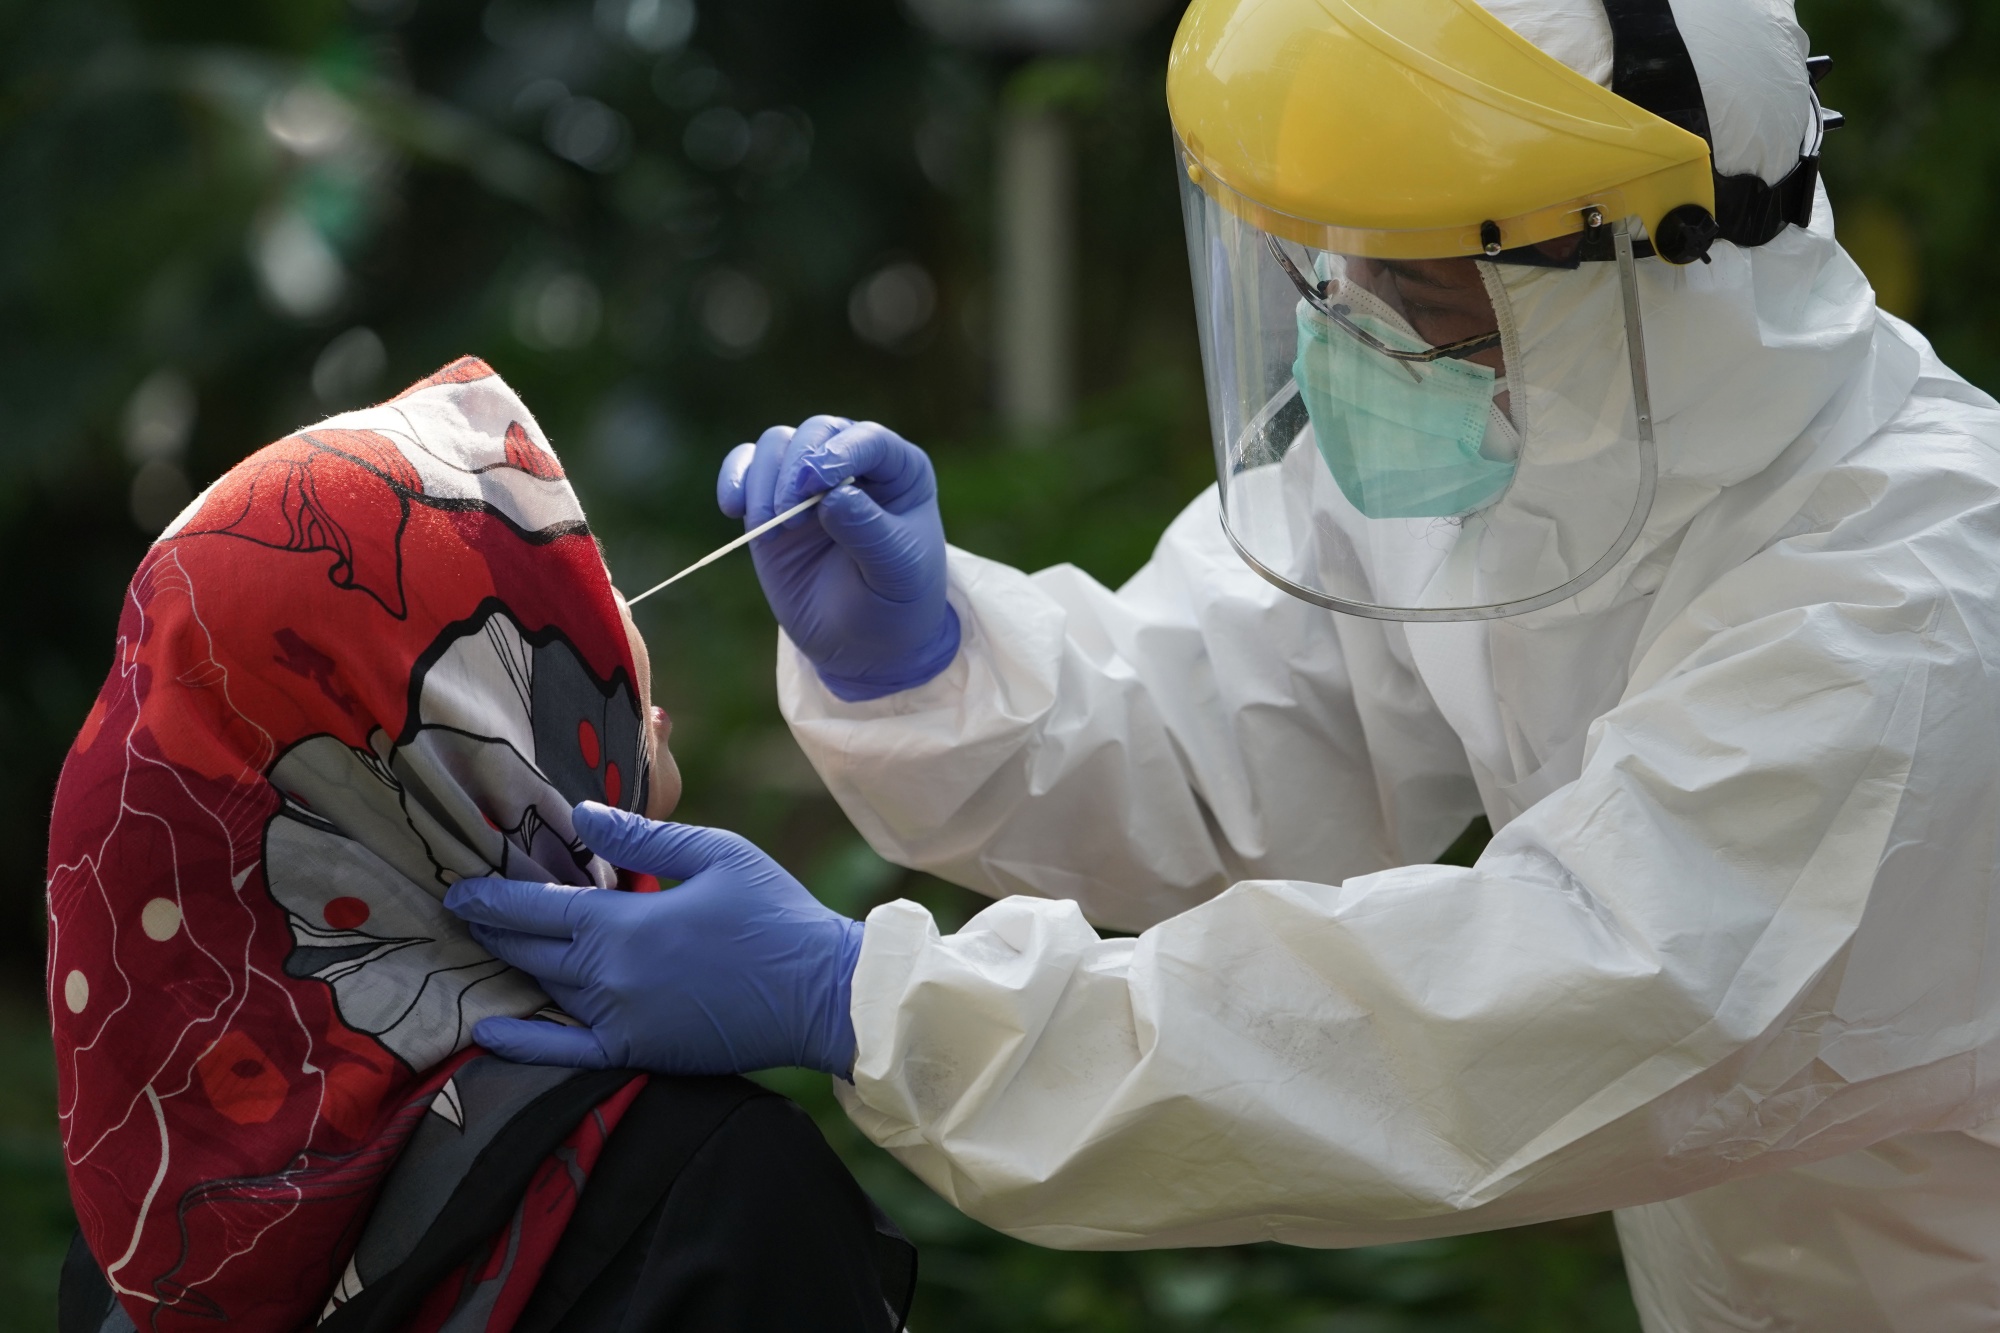 Covid-19 Testing in Jakarta as Indonesian Virus Cases Top 100,000